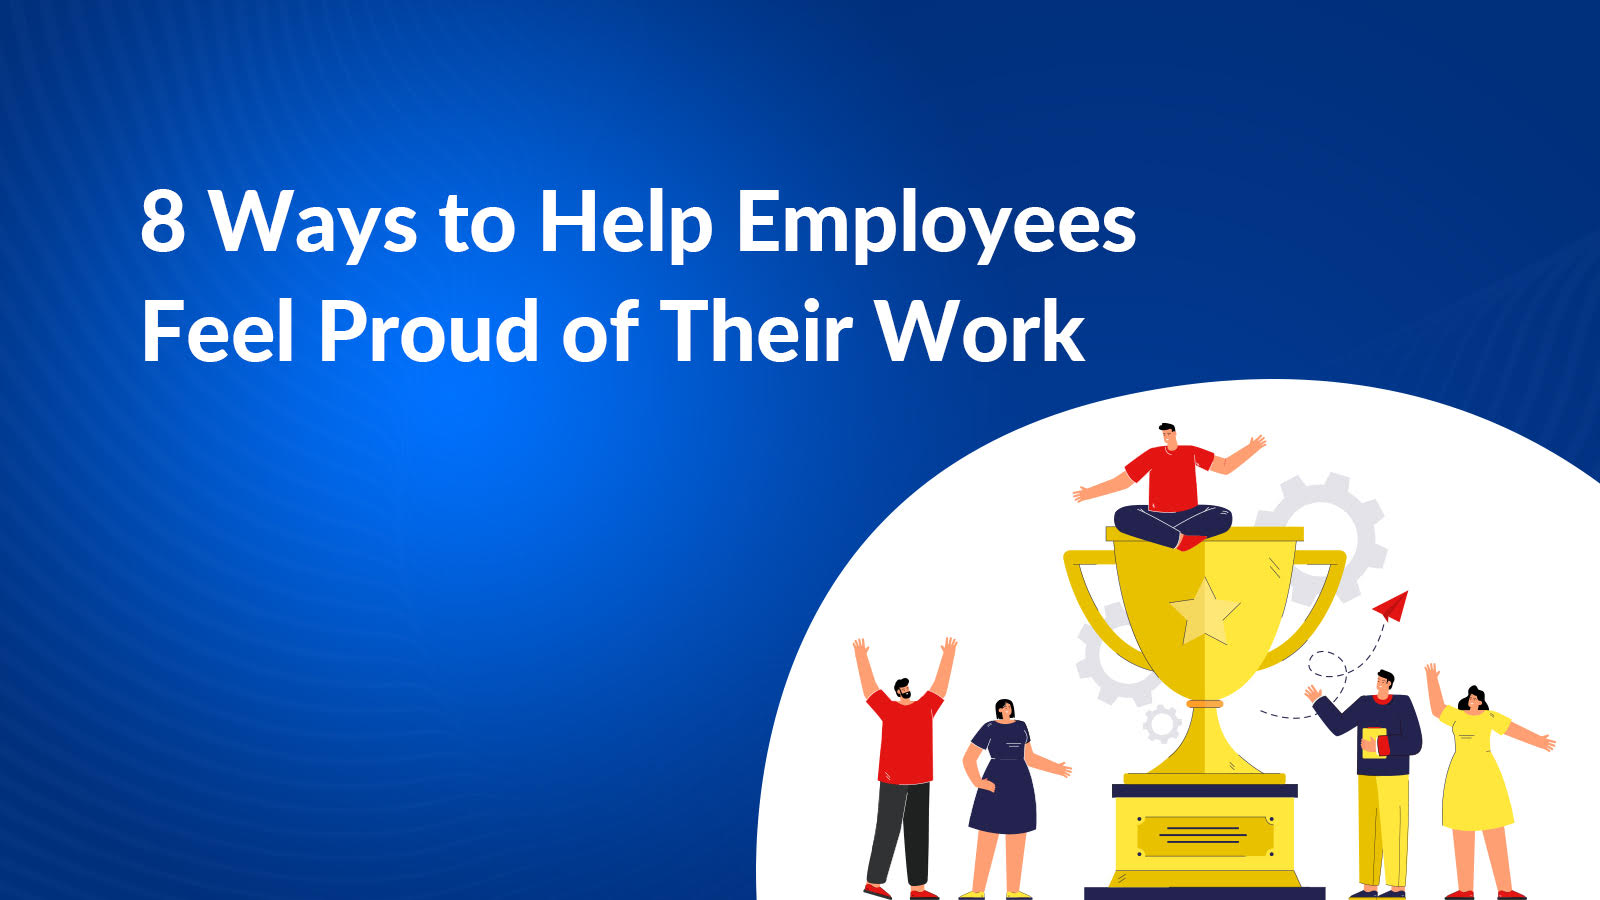 employees to feel proud of their work